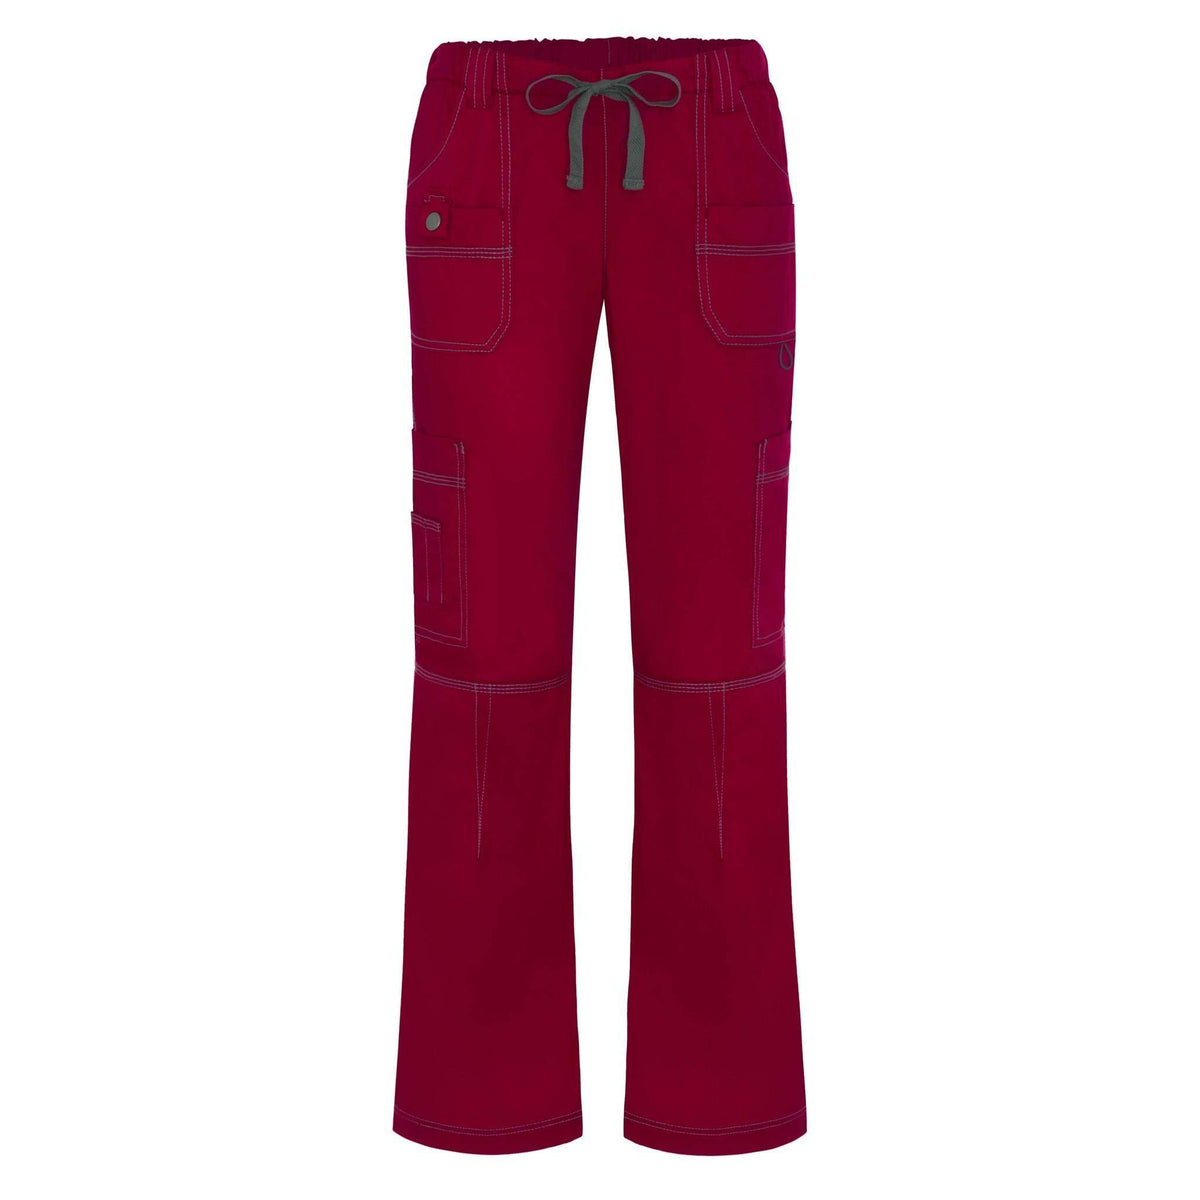 Buy Red Straight Pants with Pocket